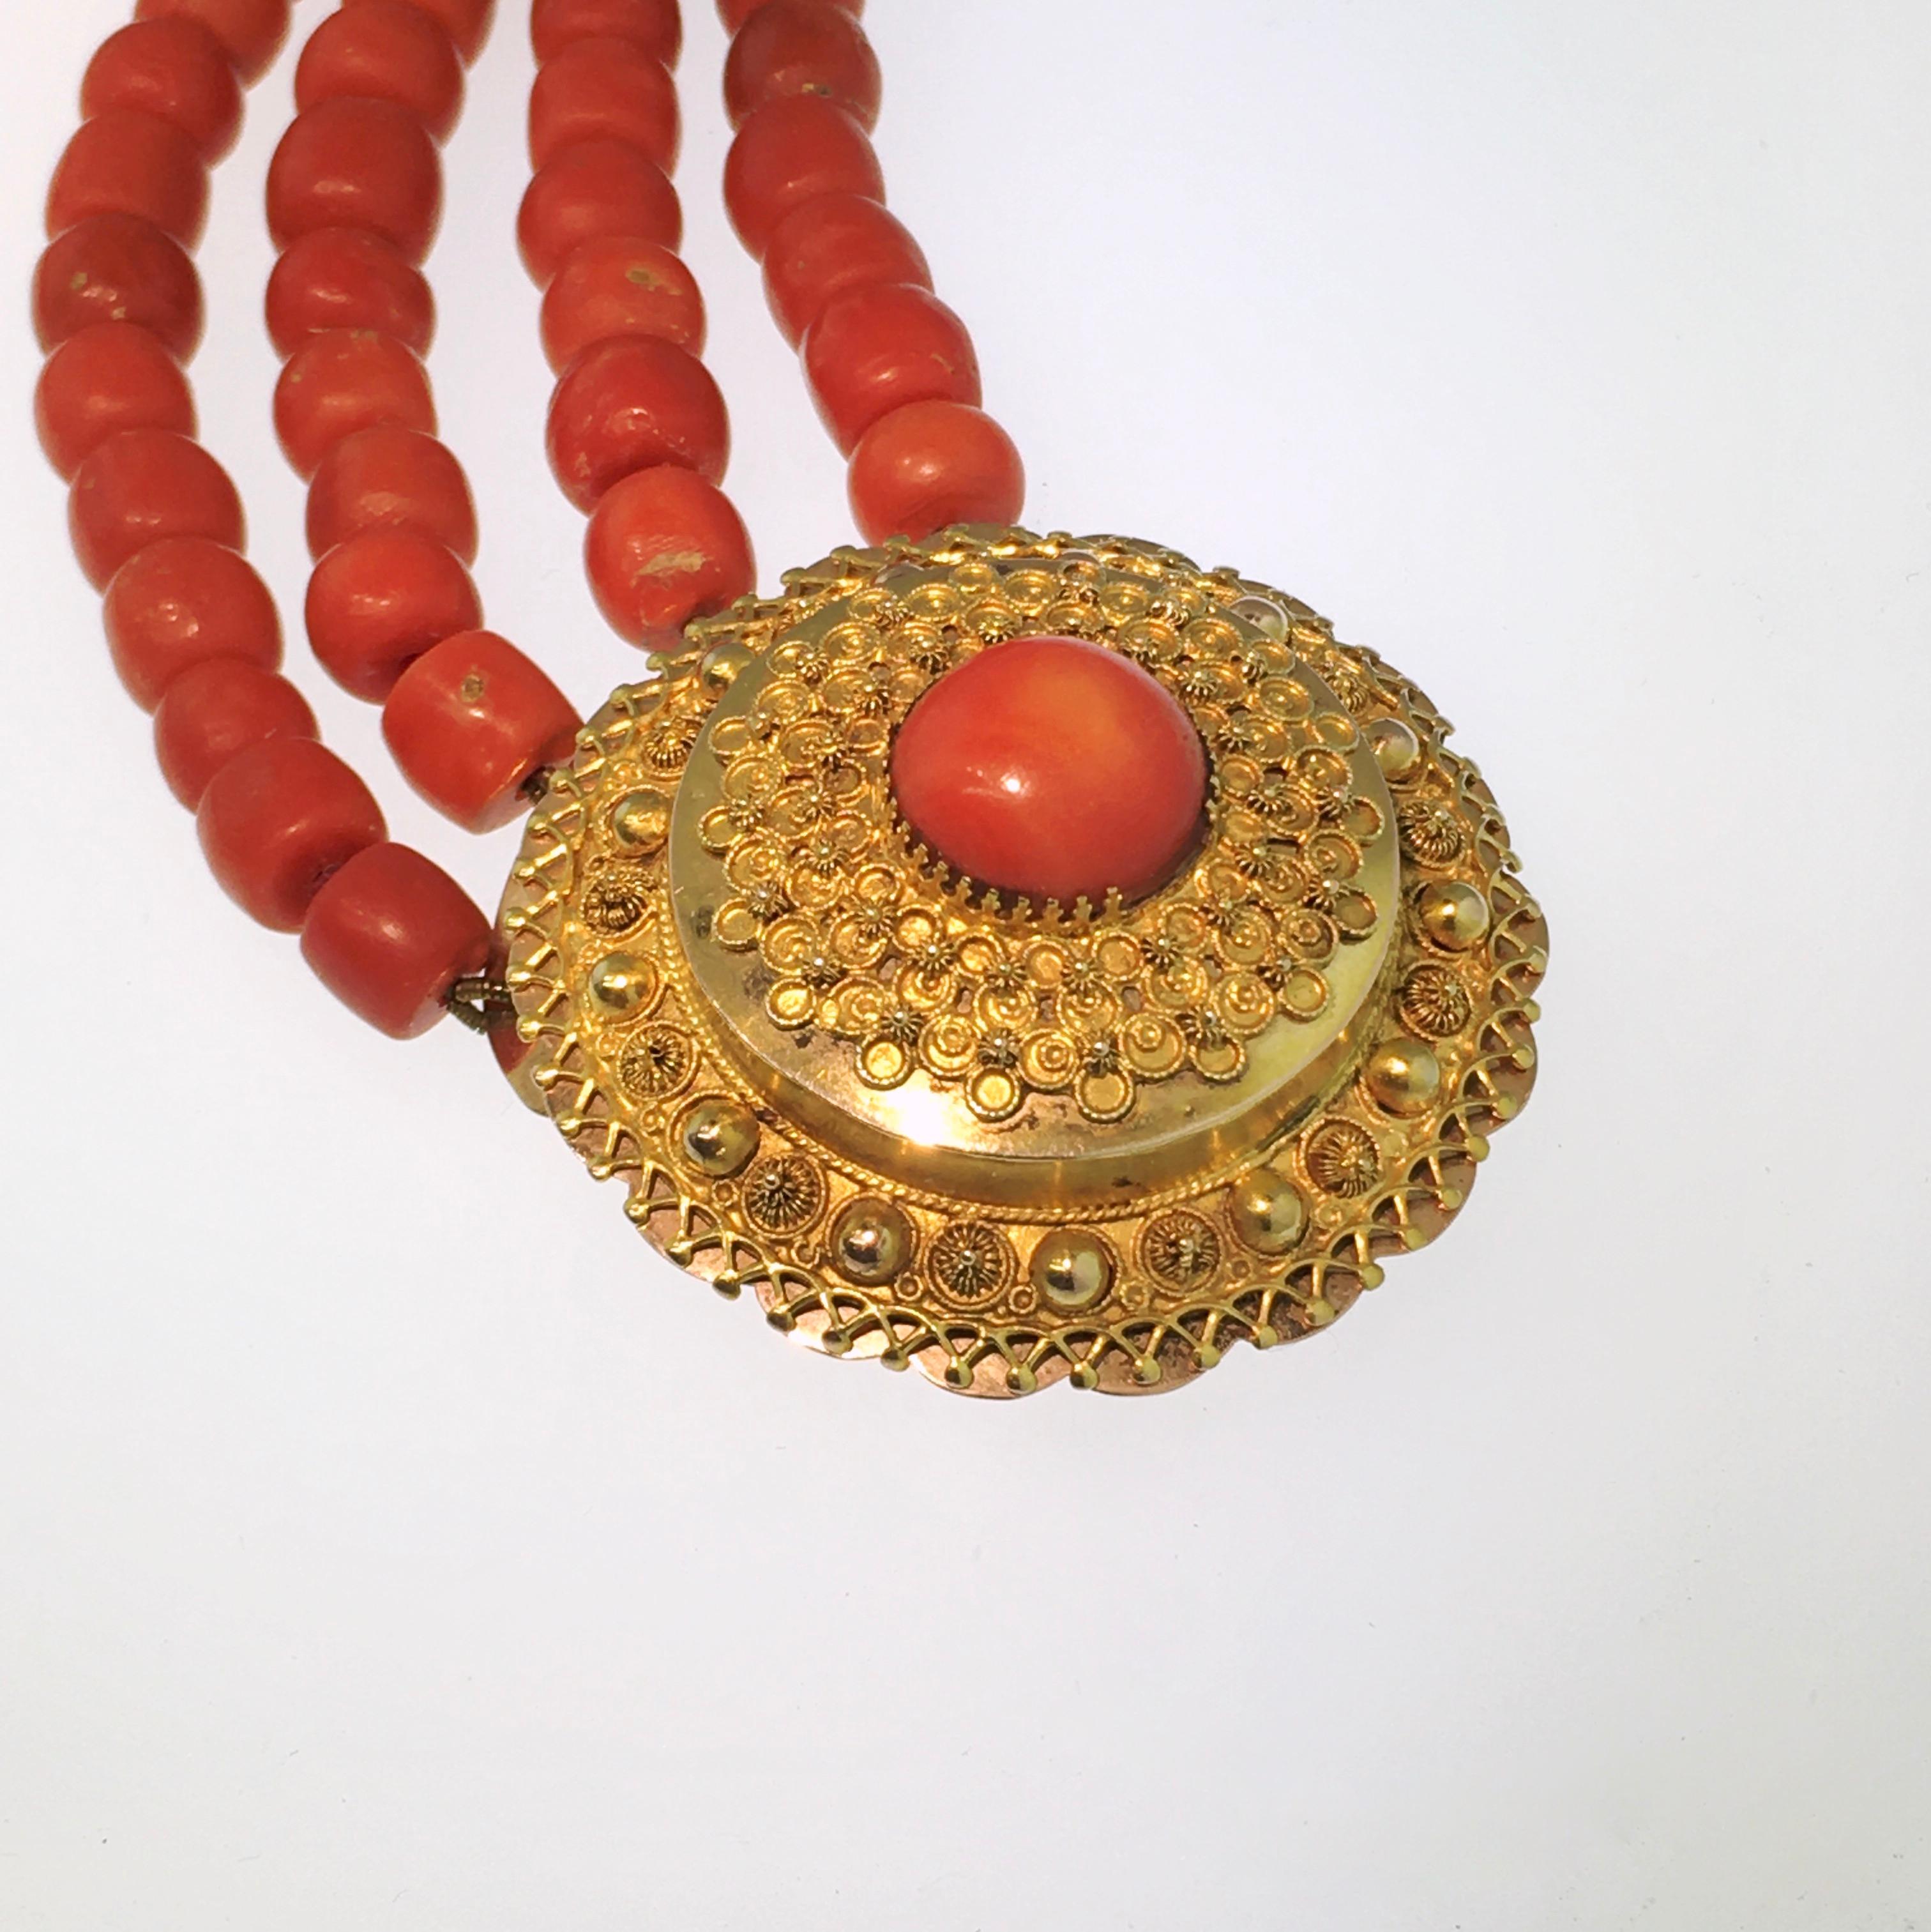 Antique Mediterranean  Red Coral, Necklace, 4 strands, Yellow Gold, 1880
Traditional Dutch costume jewelry. The 4 strand necklace with yellow golden clasp dates from ca. 1880. All of its Mediterranean red corals are antique and untreated, and are